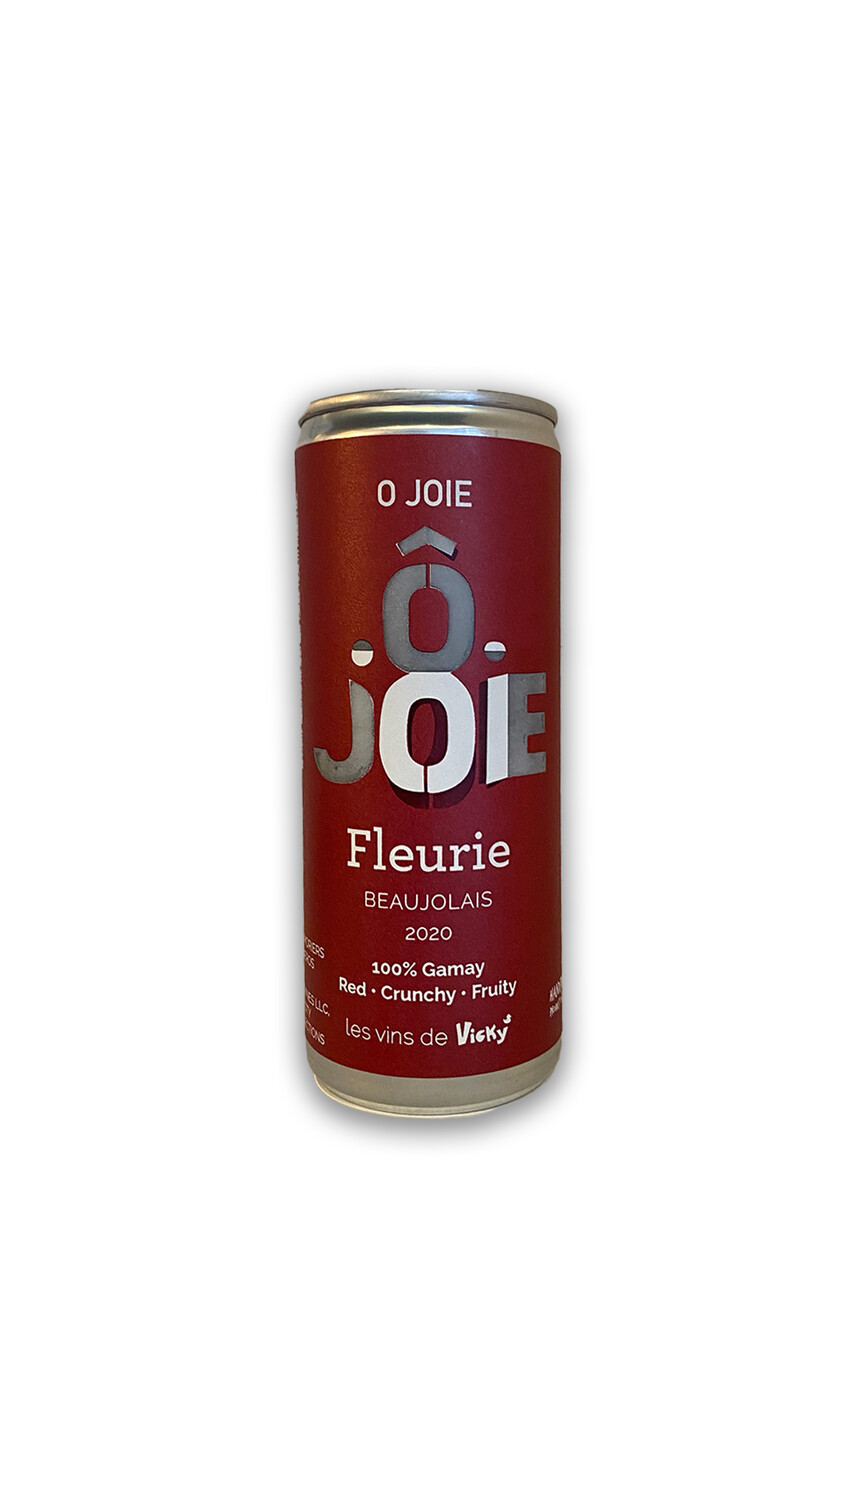 O Joie Fleurie Beaujolais can 100% Gamay